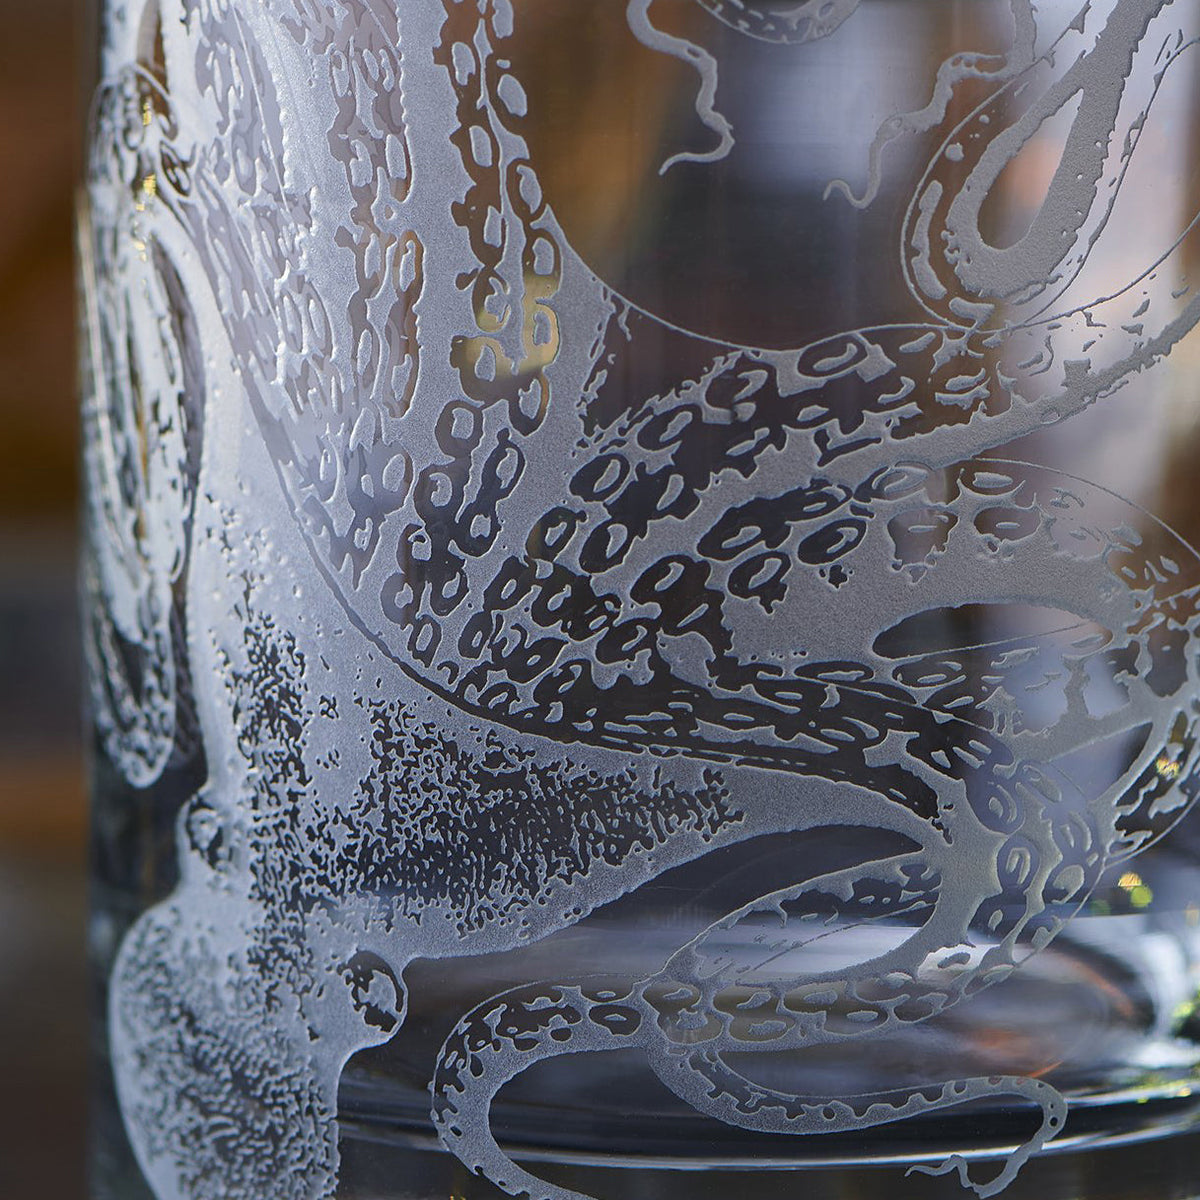 Close-up of an intricately etched octopus design on a piece of Lucy Rocks Glasses from Caskata Artisanal Home, showcasing the exquisite sand-etching technique.